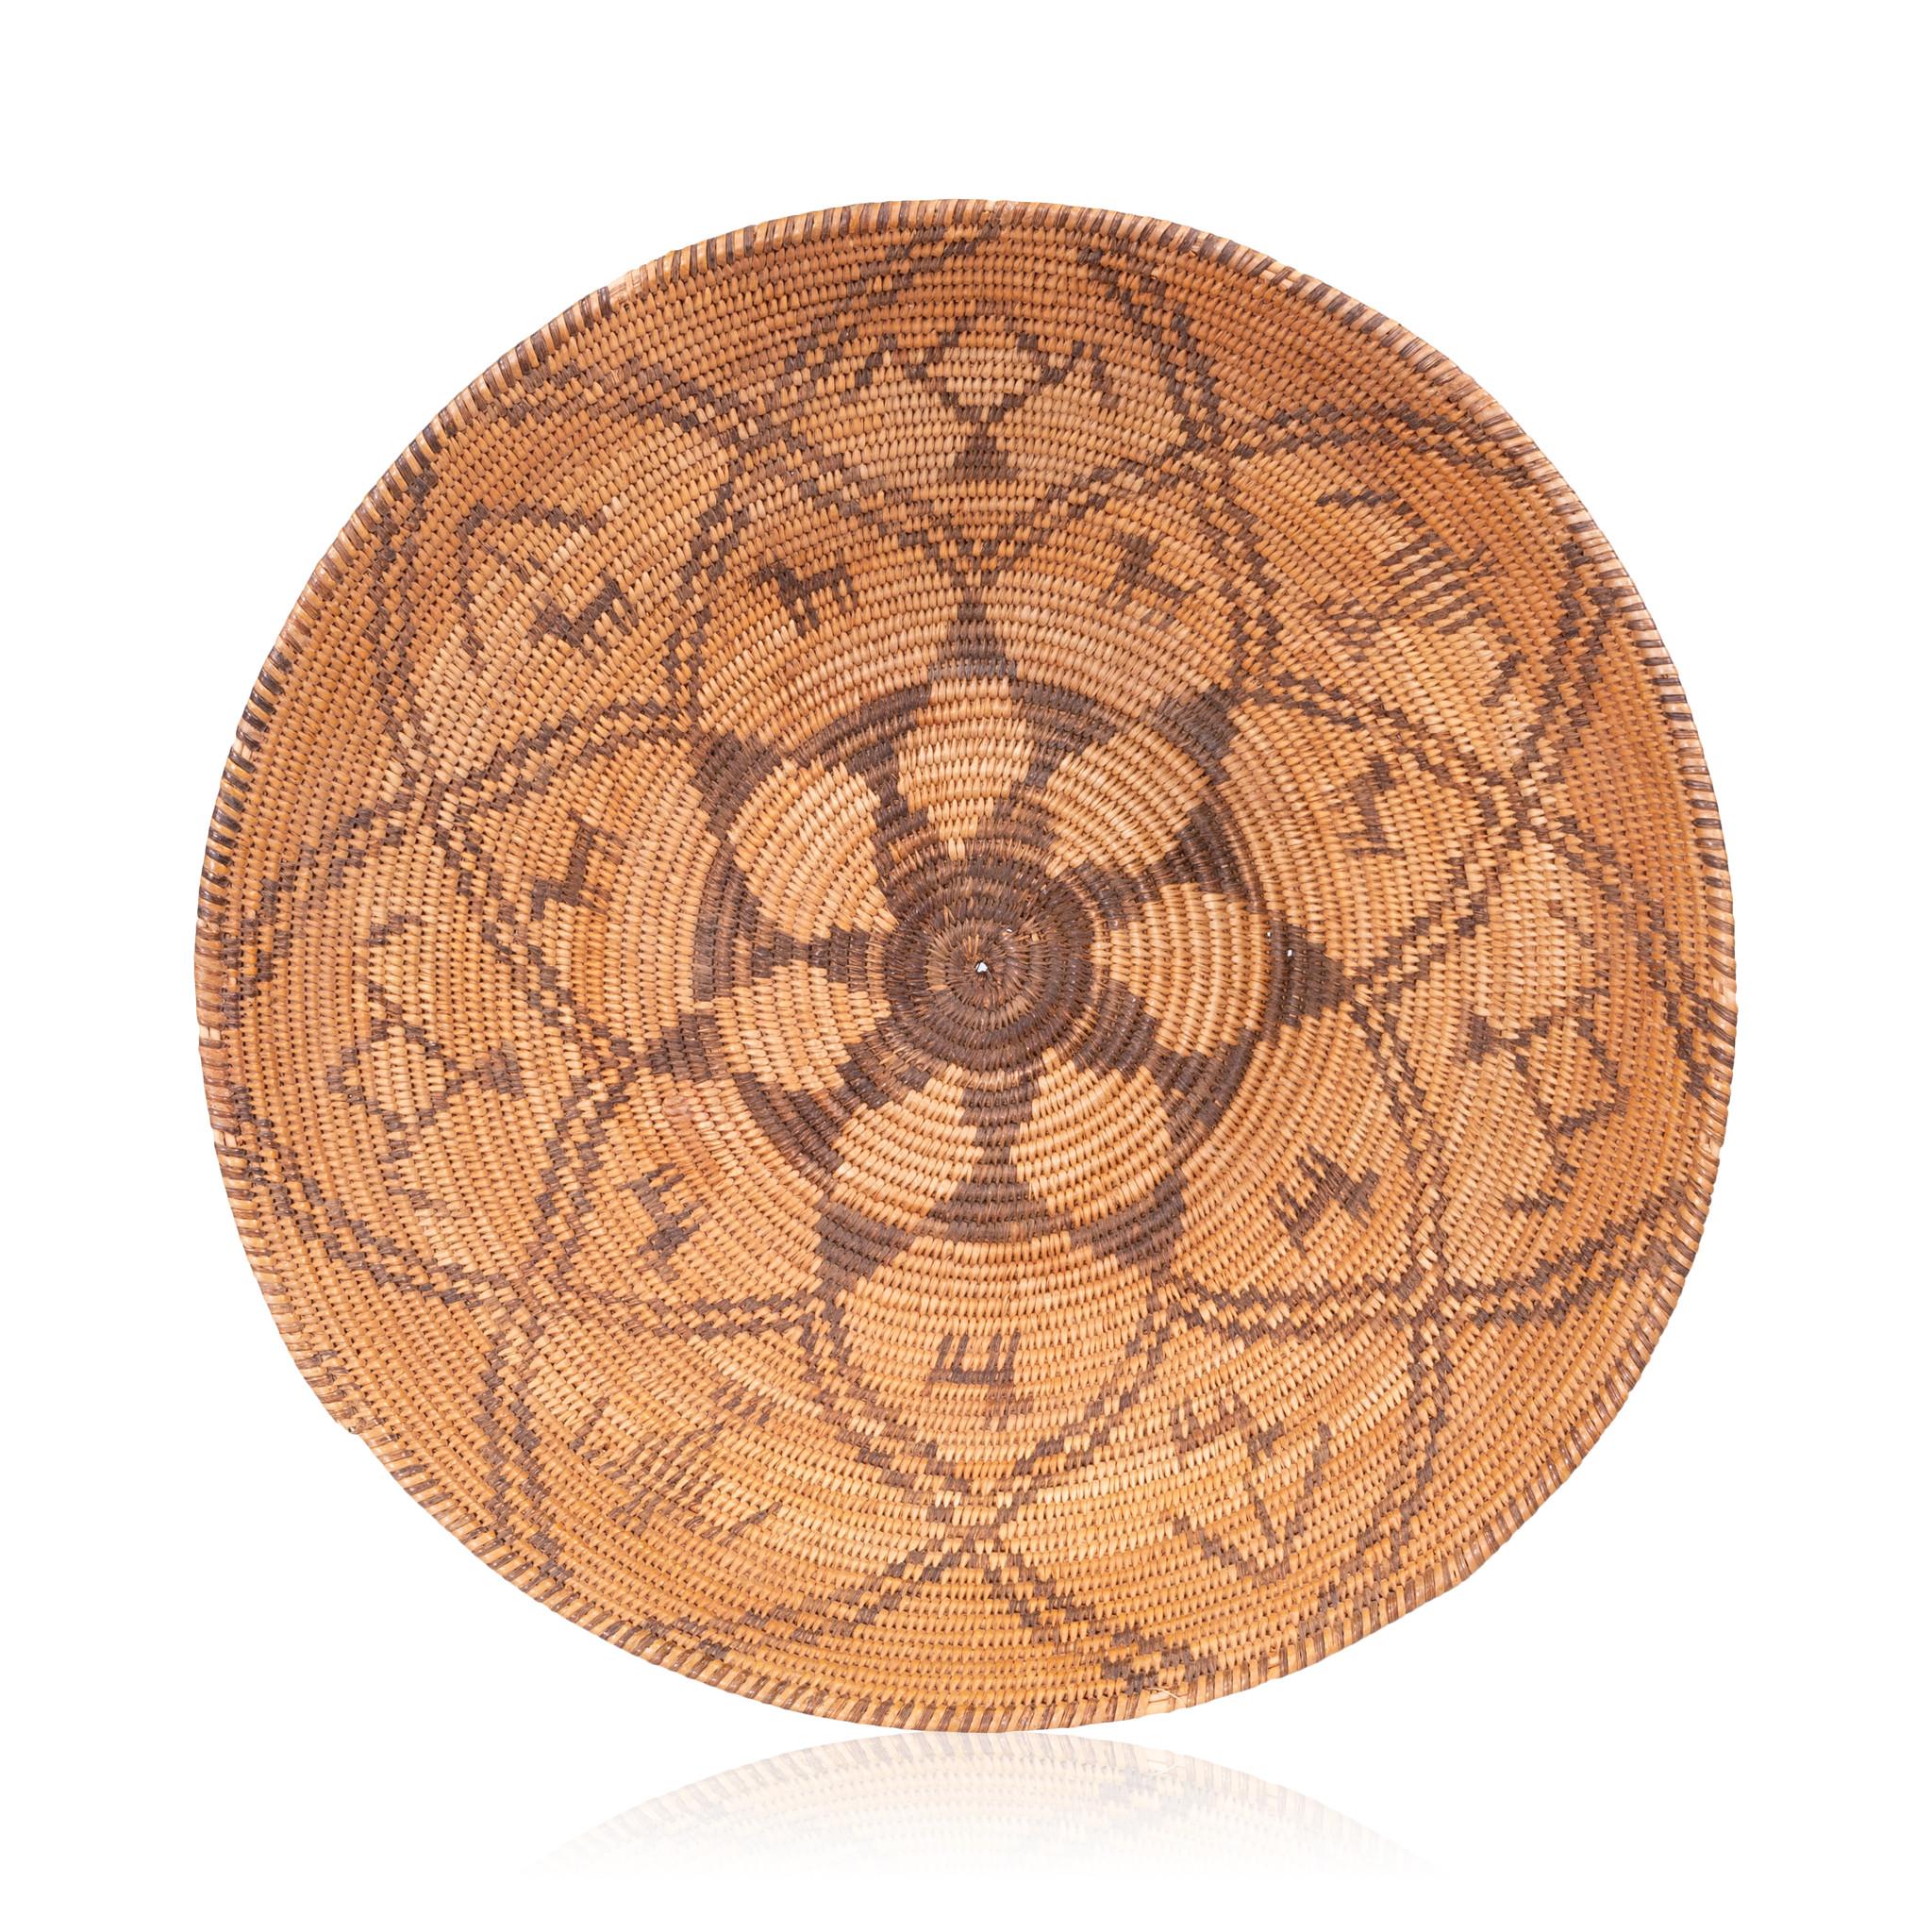 Finely woven pictorial apache basket with flower design, dogs, humanoids and geometrics.

Period: circa 1900
Origin: Apache, Arizona
Size: 4